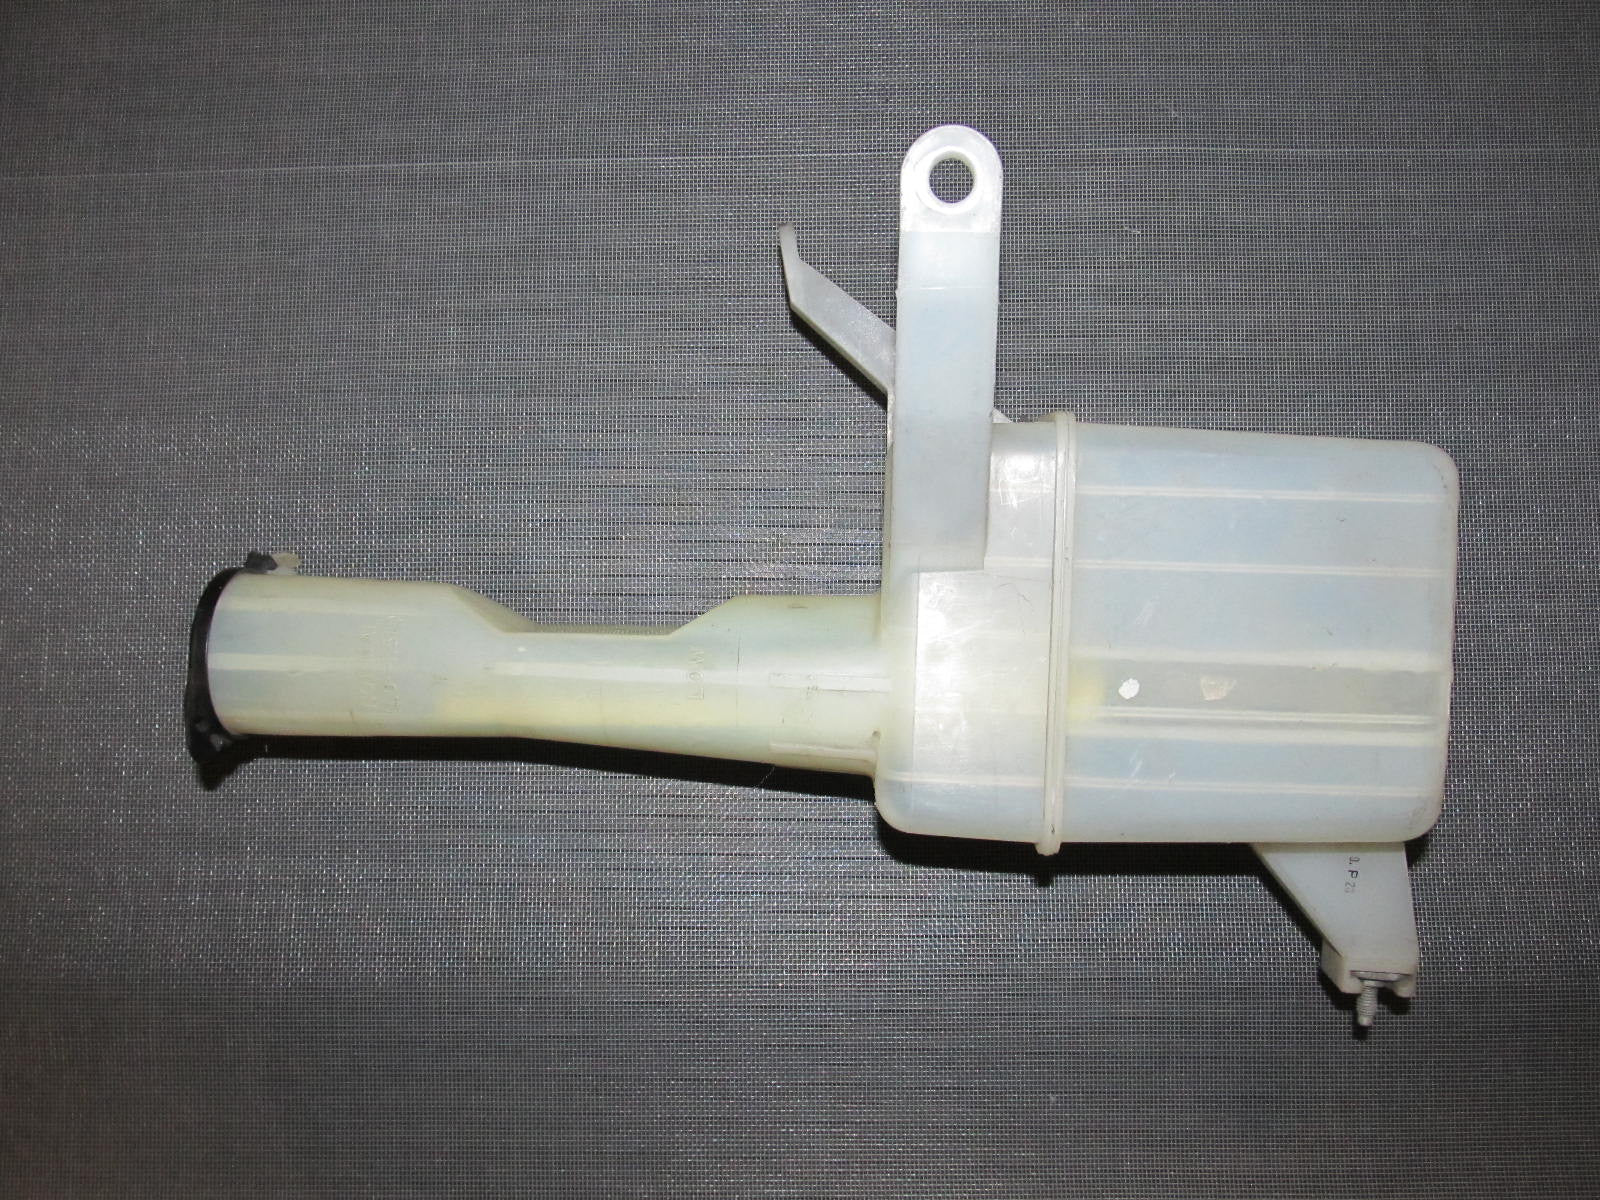 90-93 Toyota Celica OEM Windshield Washer Tank Reservoir with Pump - Coupe